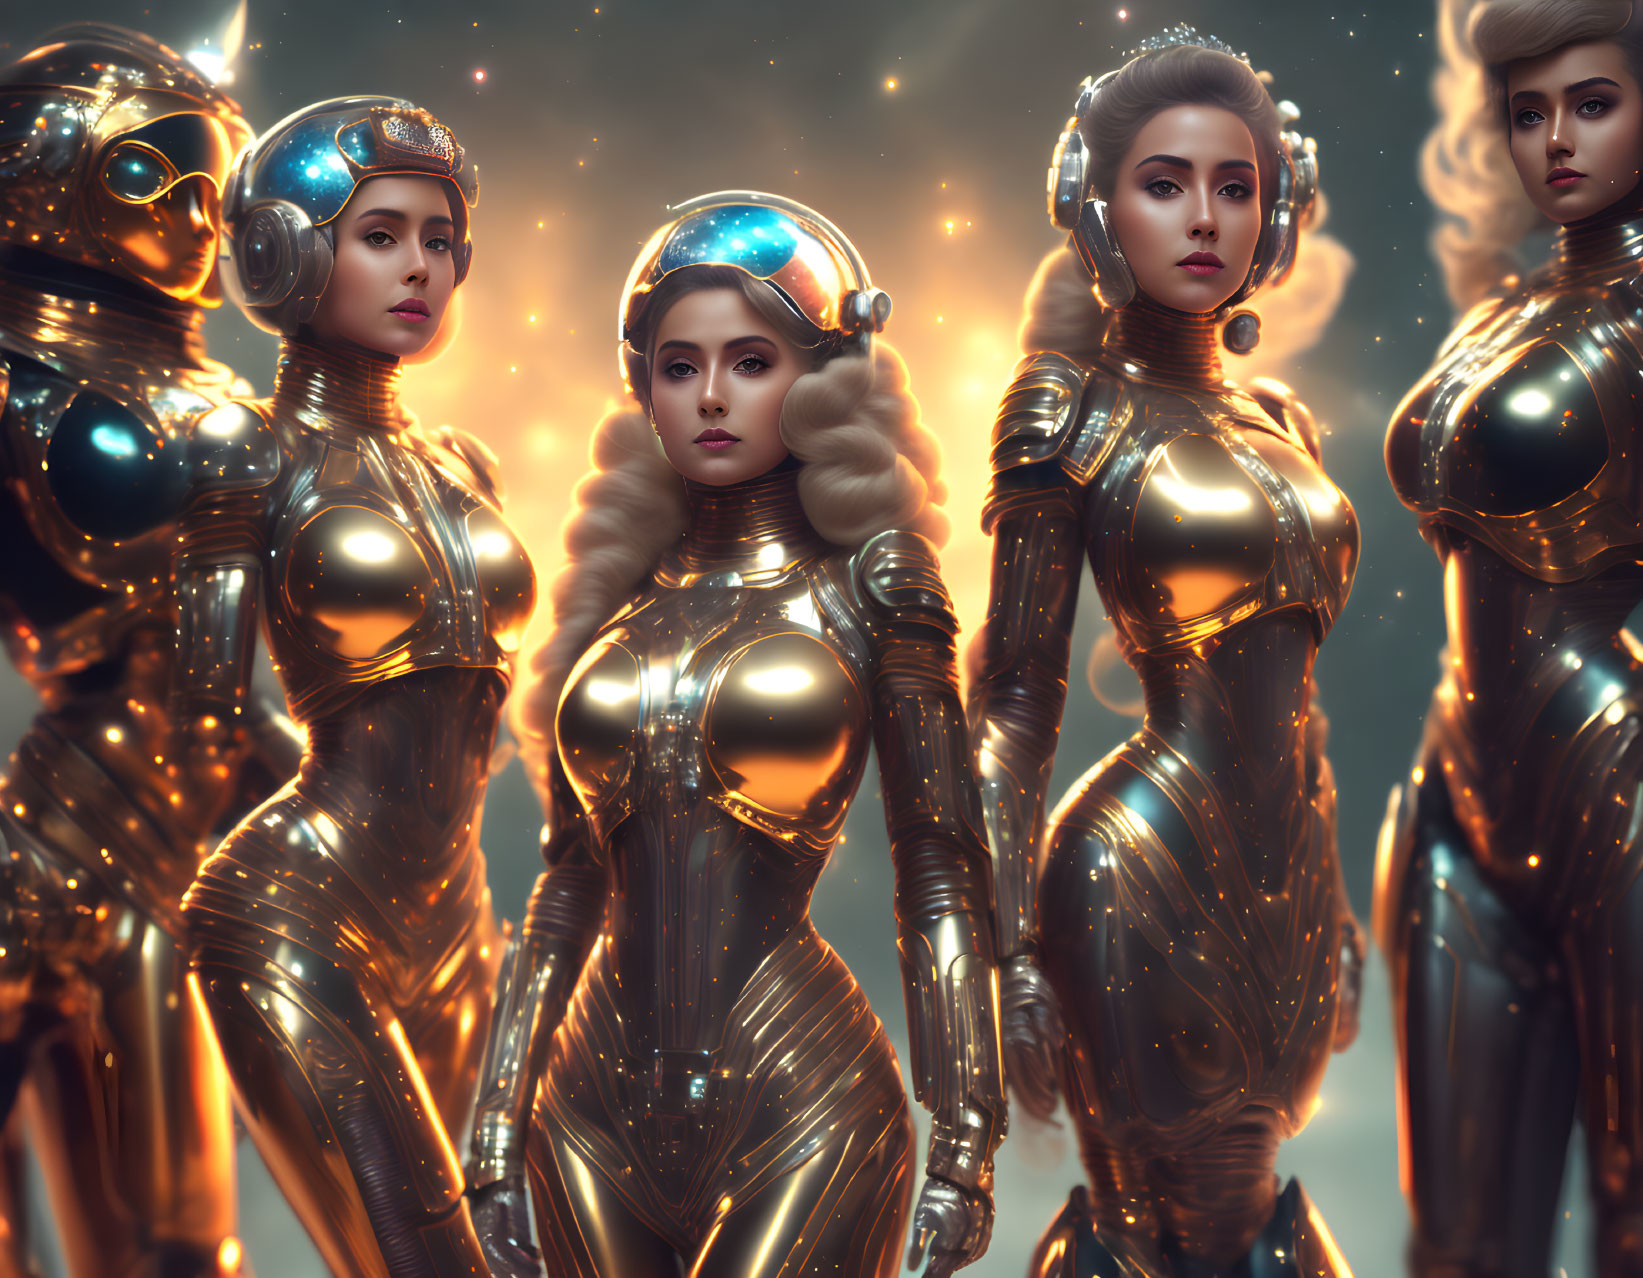 Four futuristic female figures in gold spacesuits against glowing backdrop